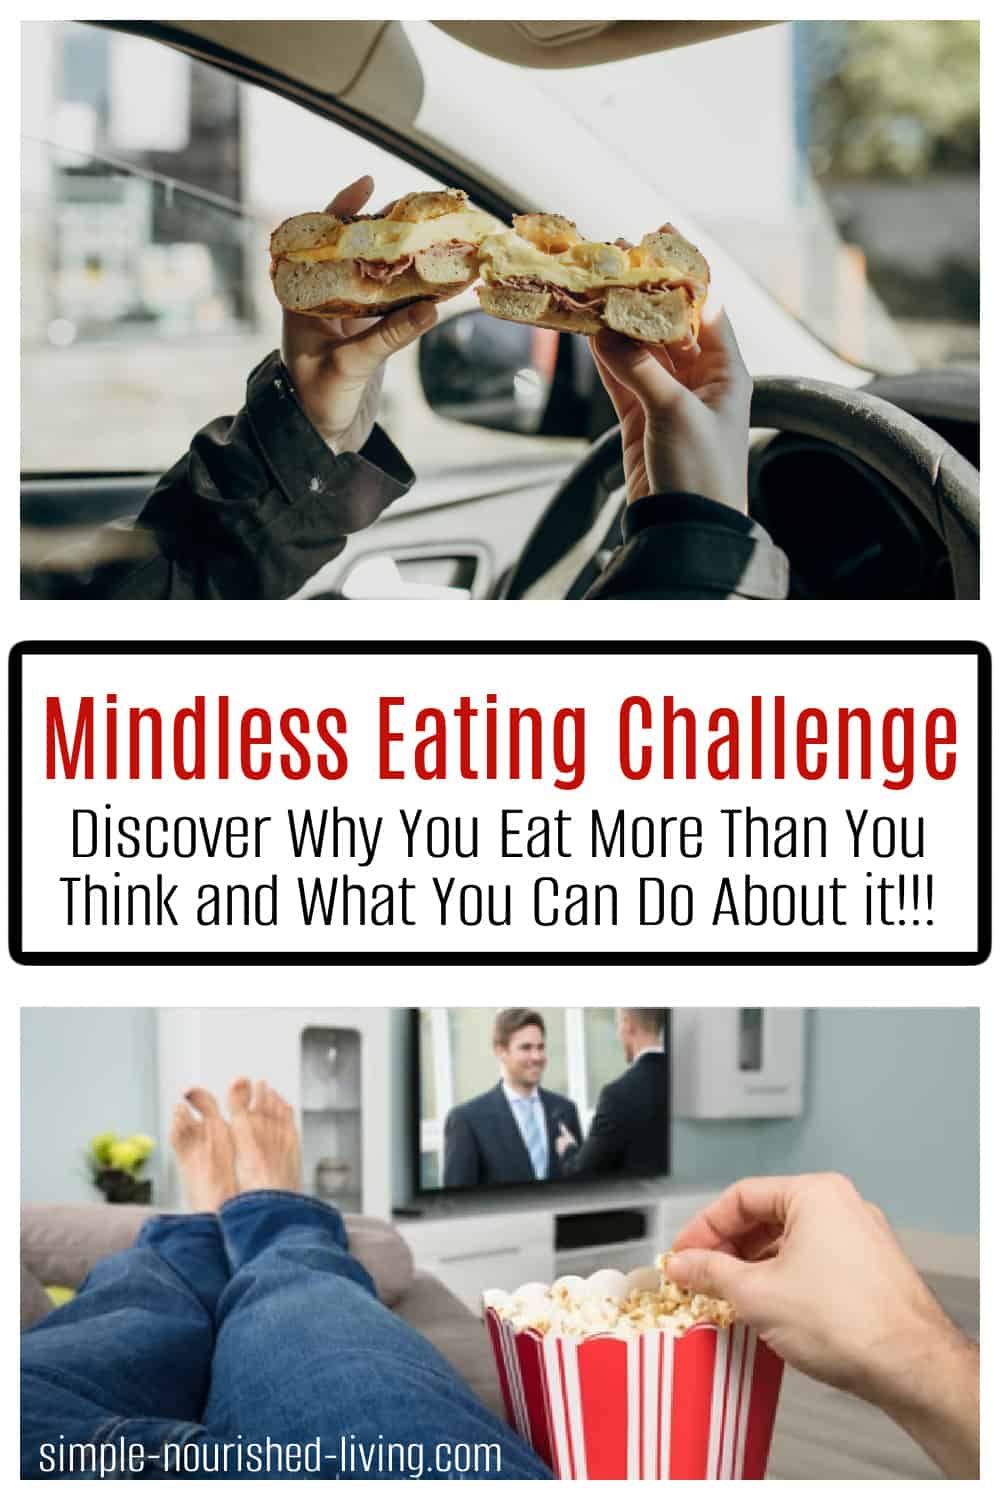 3 frames: top photo driving while eating a breakfast bagel sandwich, bottom photo person lying on sofa watching television eating popcorn with Text in between: Mindless Eating Challenge: Discover Why You Eat More Than You Think and What You Can do About it.